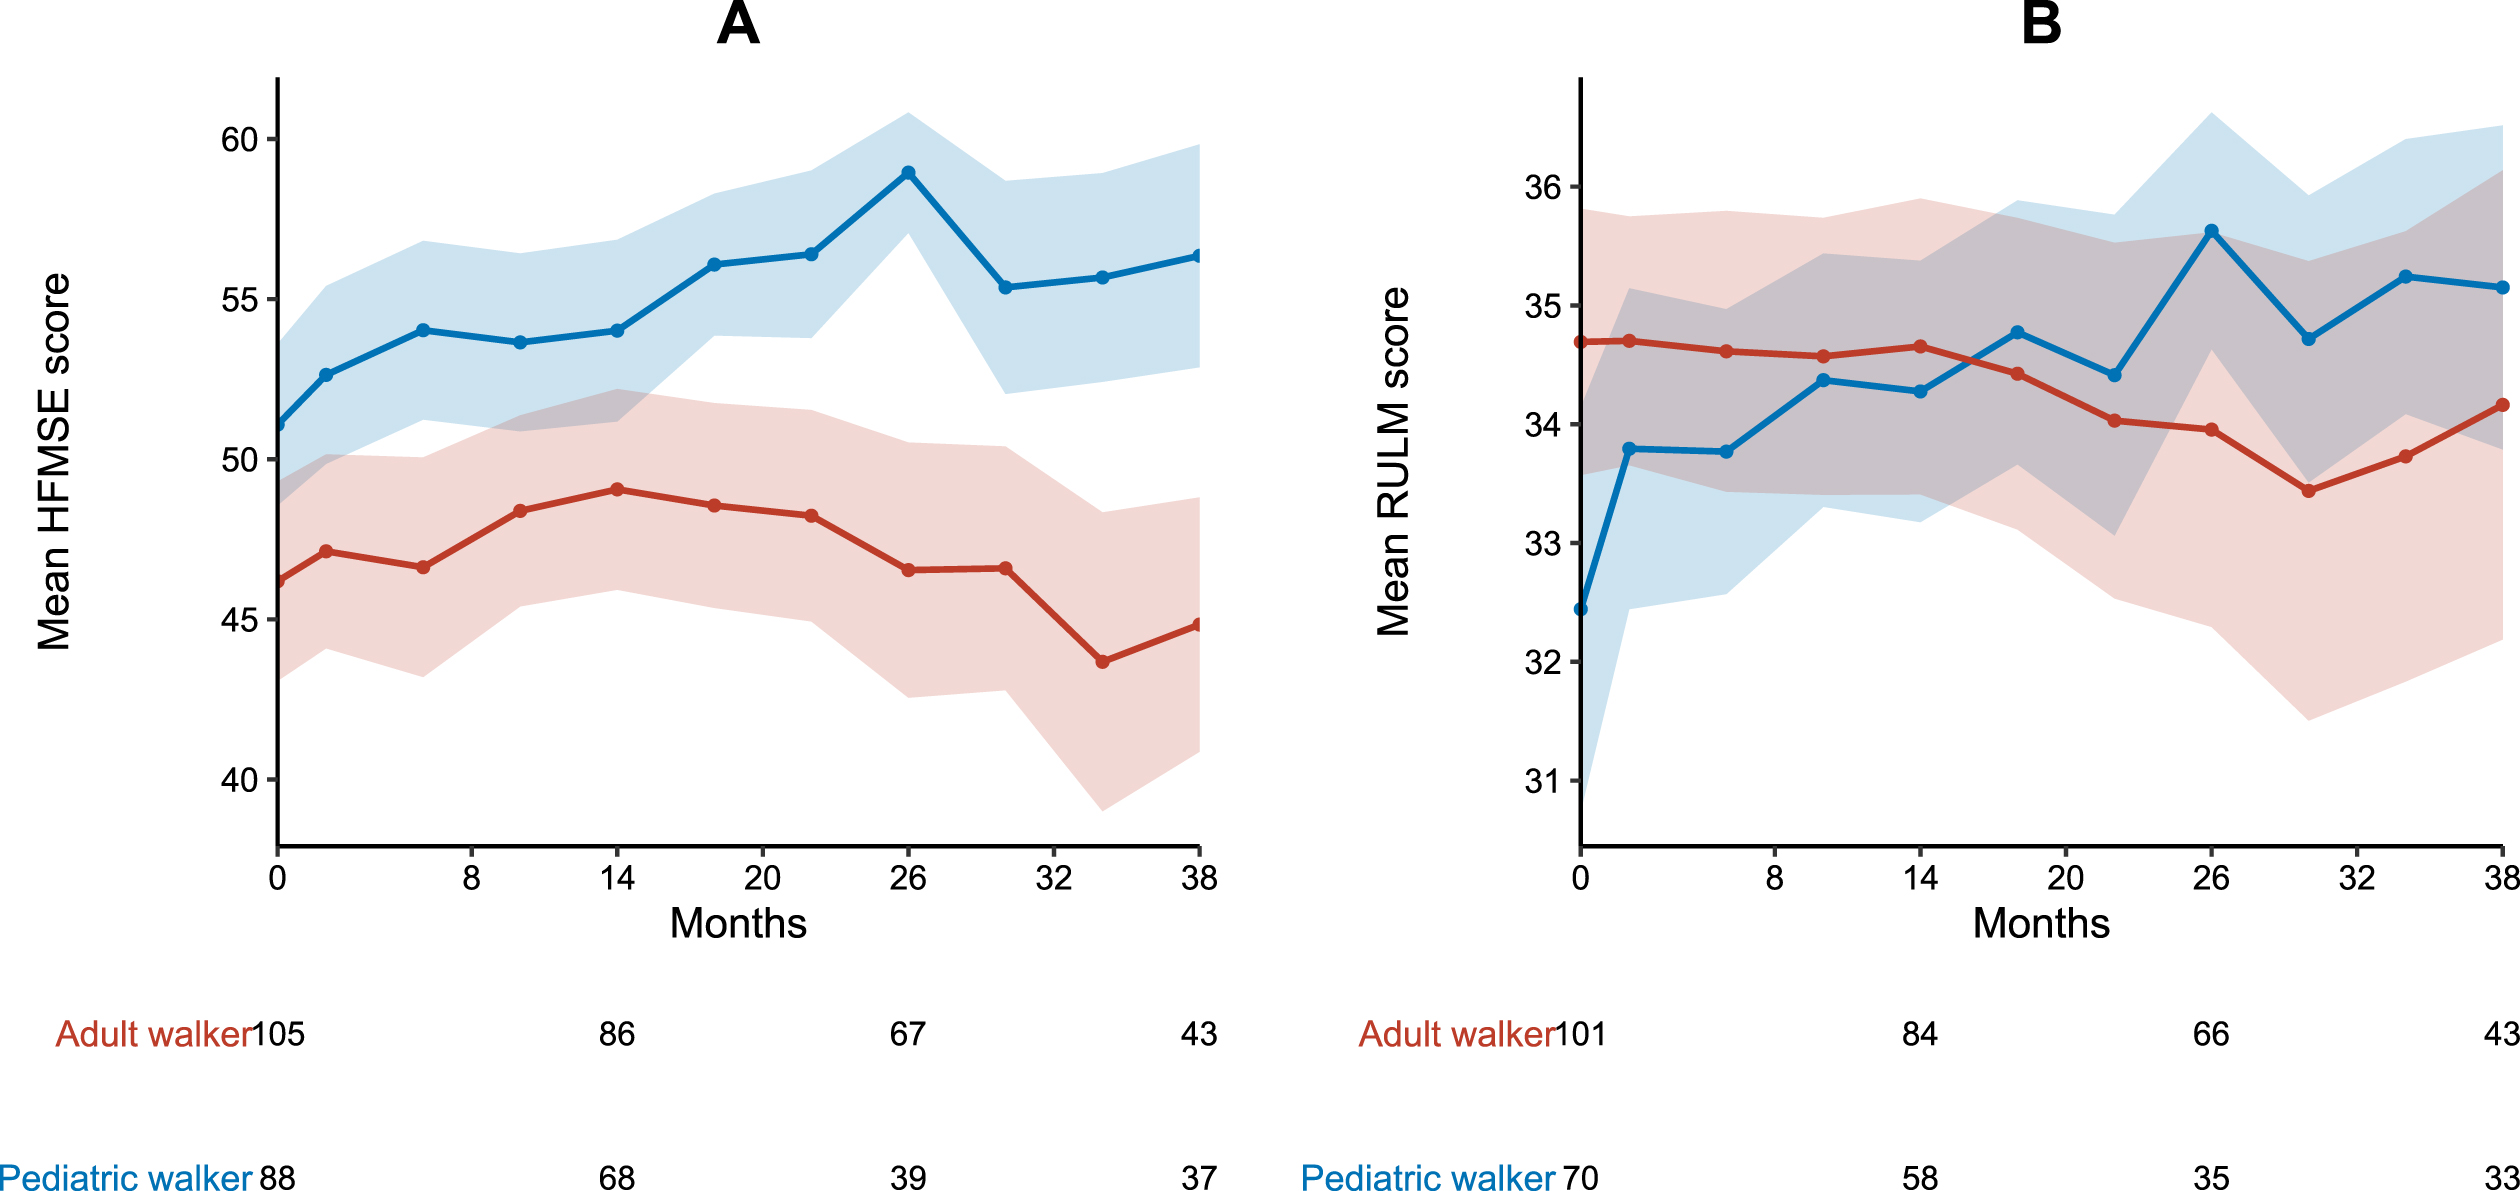 Longitudinal progression of HFMSE and RULM score. A HMFSE and B RULM score for pediatric (blue) and adult walkers (red). Data are listed as mean and 99% confidence interval. Available patients at baseline, m14, m26 and m38 are added. For a group size fewer than 10 patients no data are depicted.